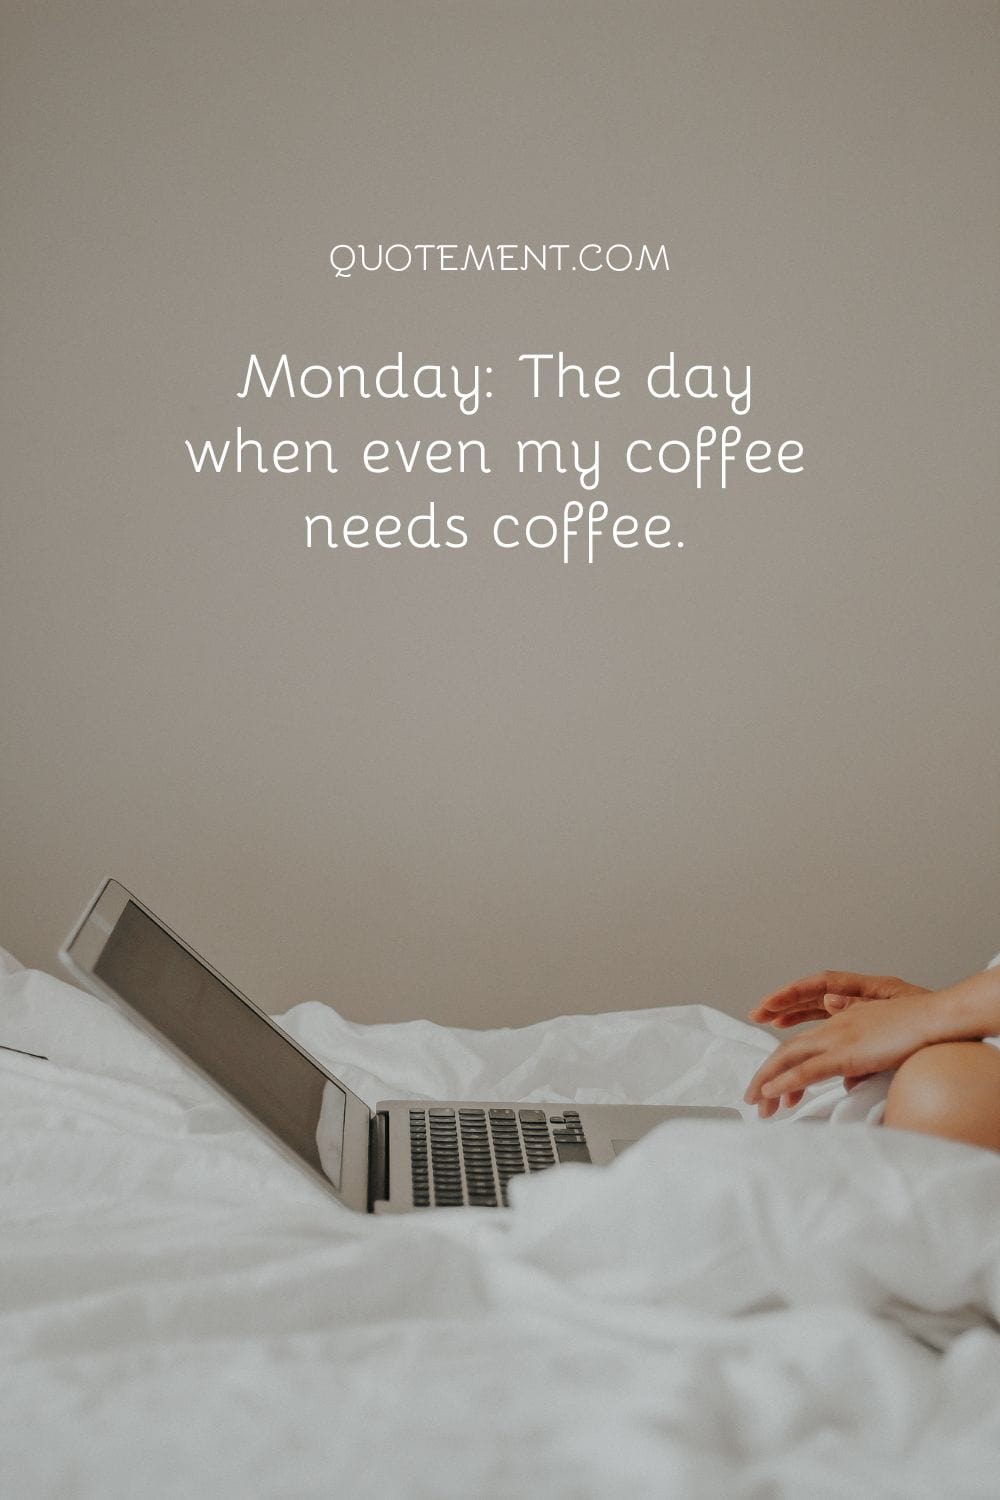 Monday: The day when even my coffee needs coffee